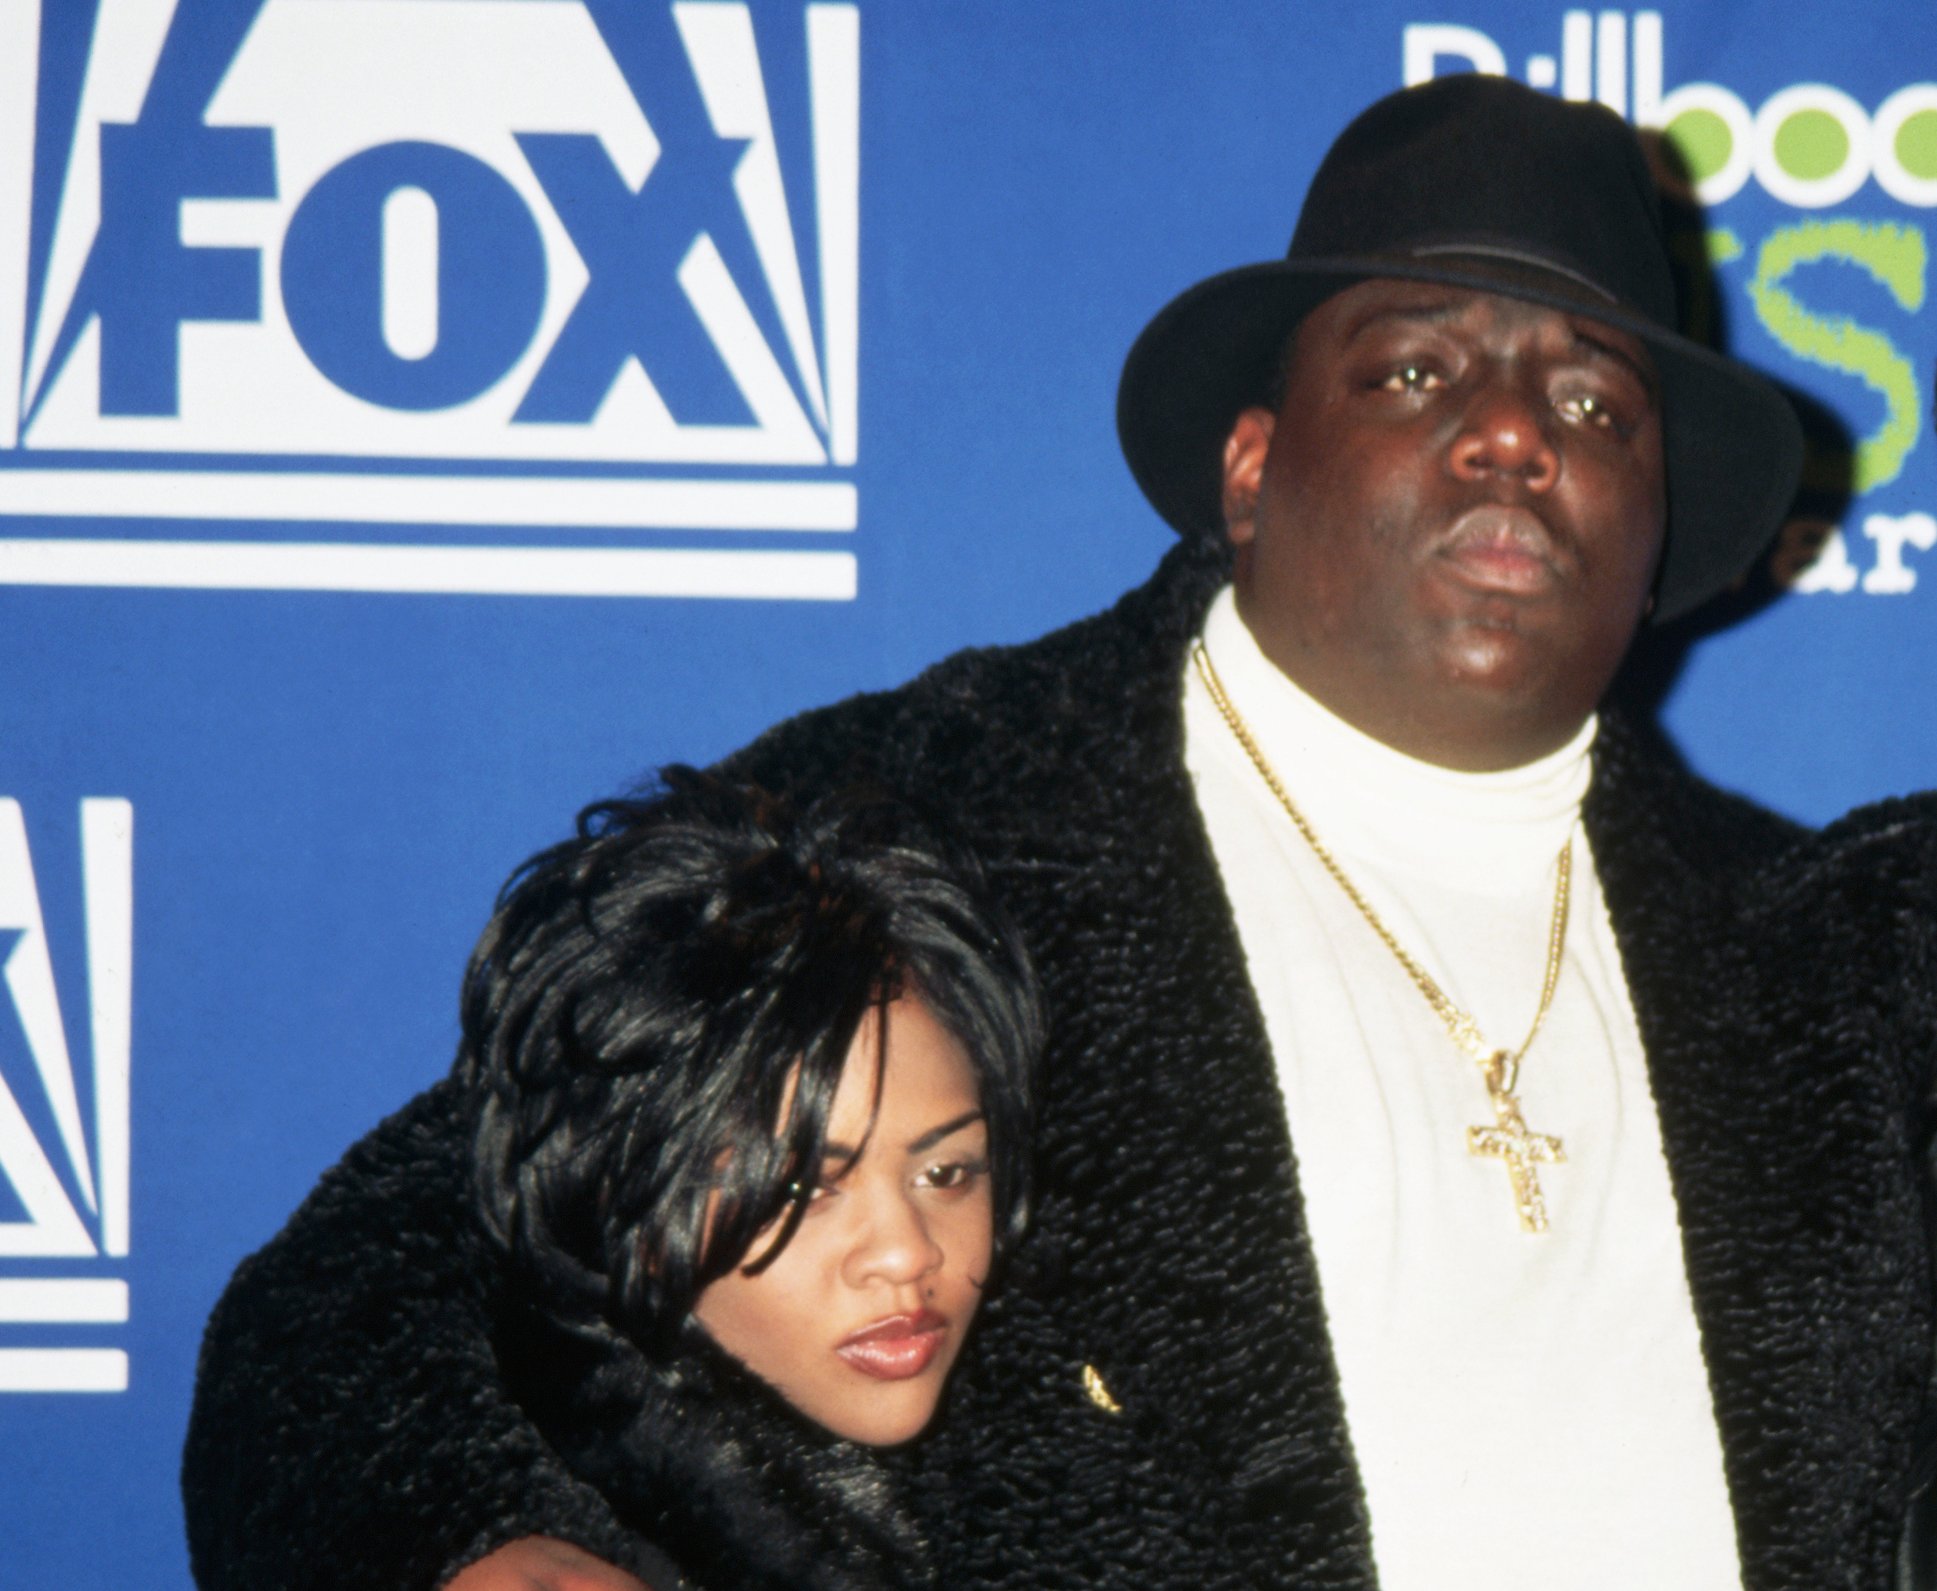 Lil' Kim and The Notorious B.I.G. on the red carpet